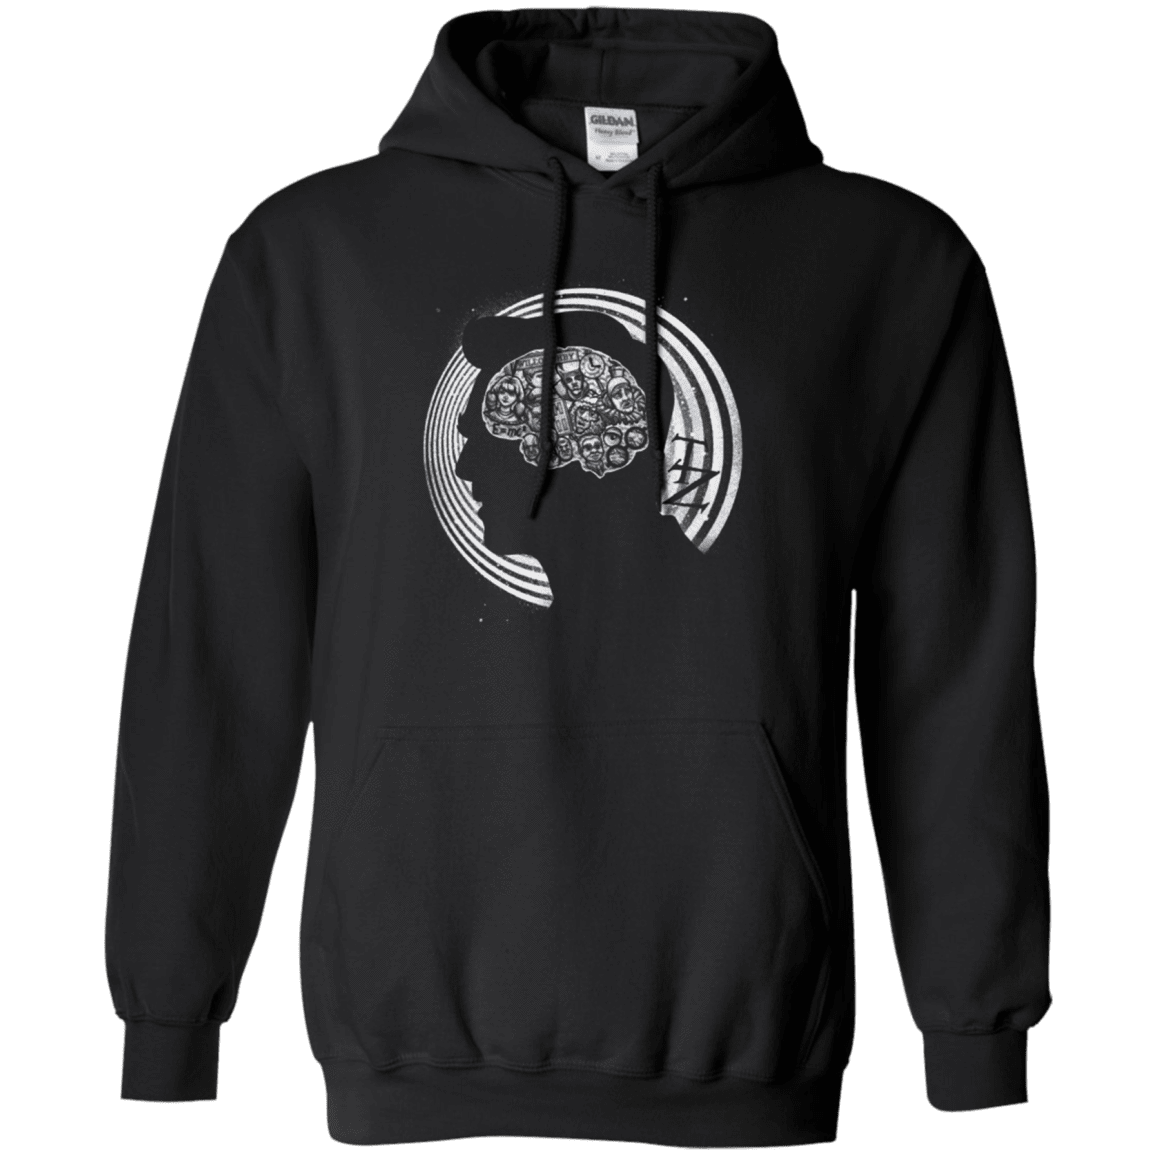 Sweatshirts Black / Small A Dimension of Mind Pullover Hoodie